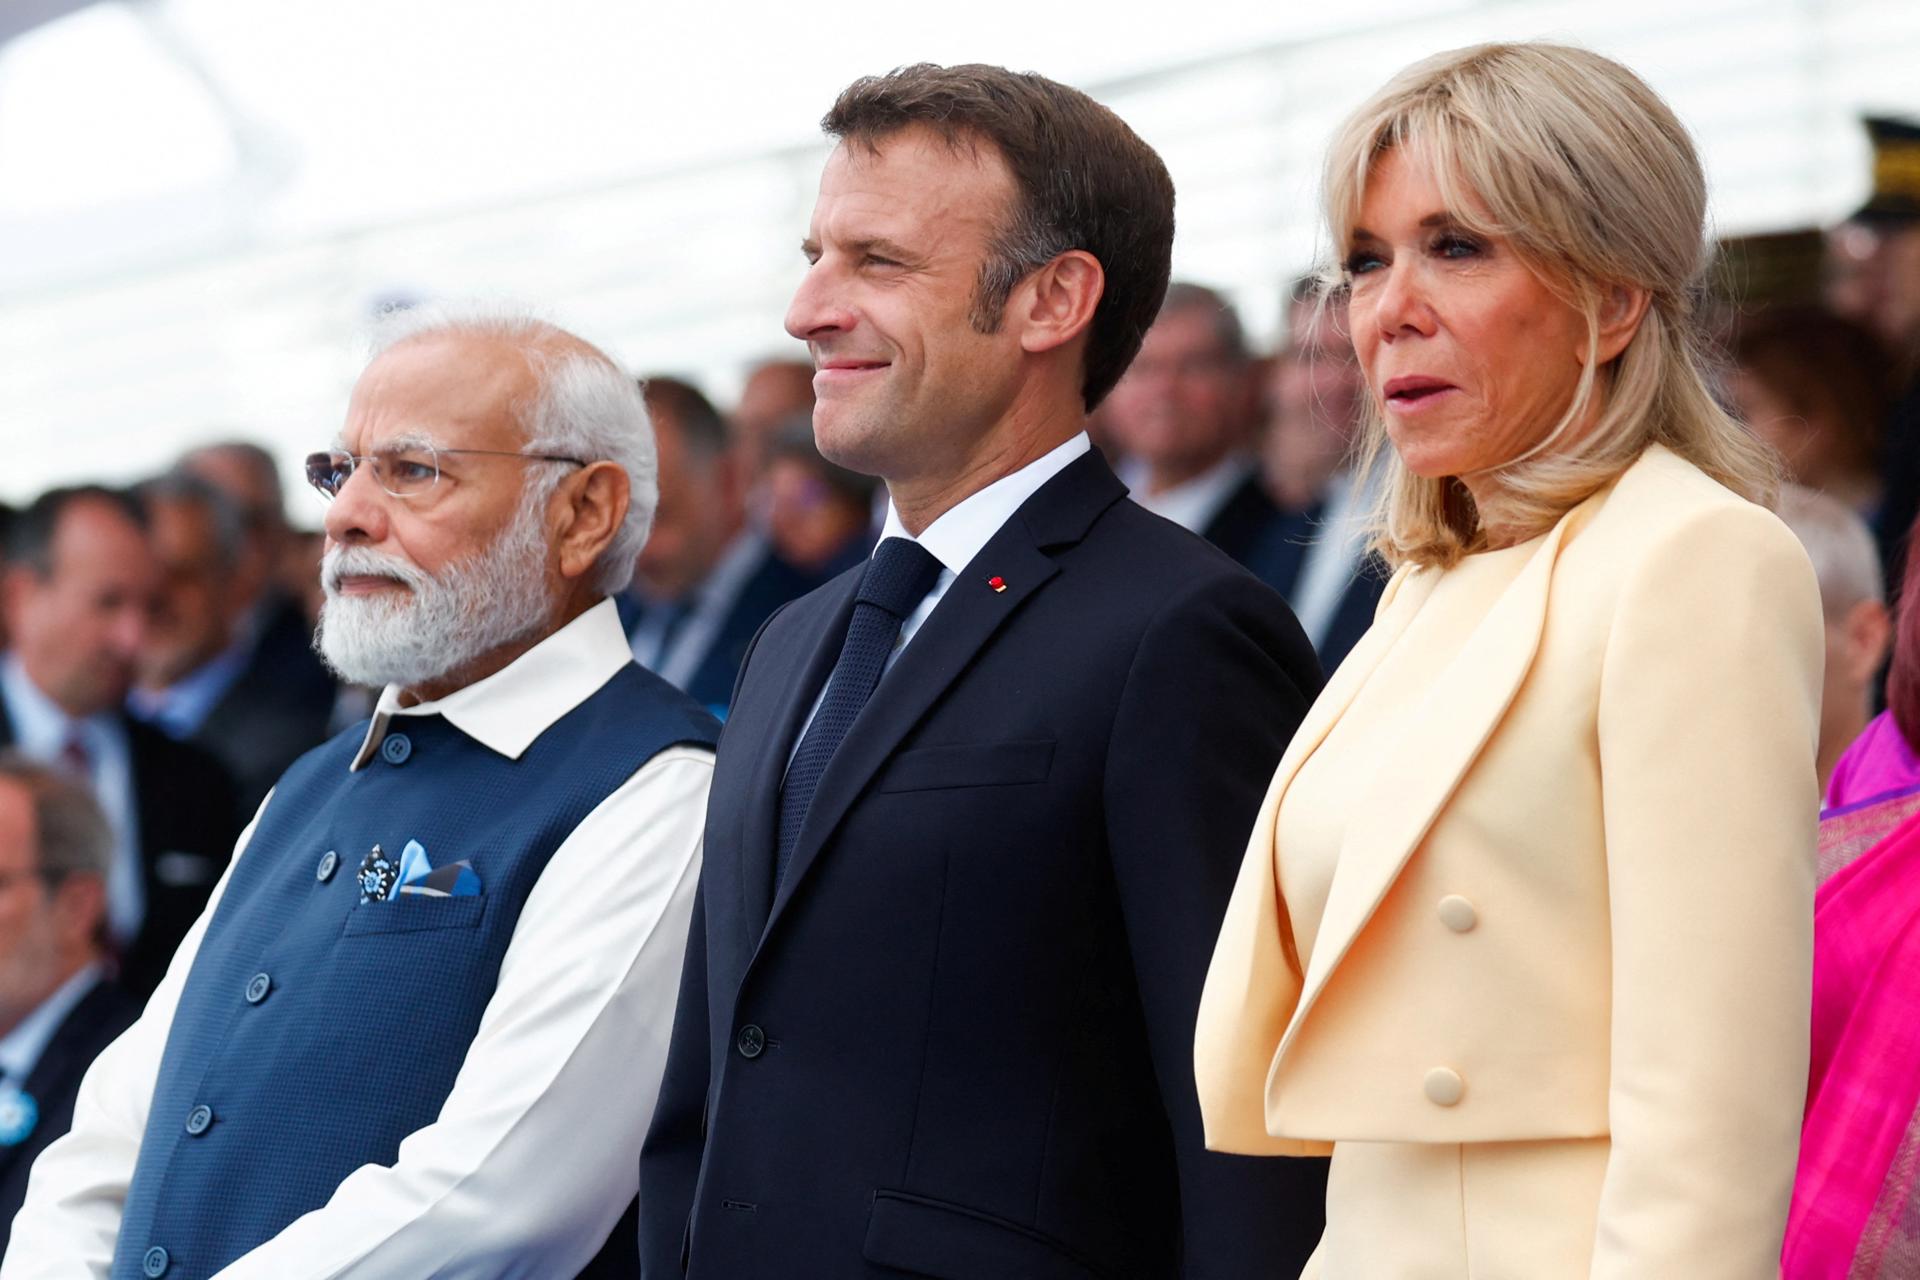 France's President Emmanuel Macron, first lady Brigitte Macron and India's Prime Minister Narendra Modi attend the annual Bastille Day military parade on the Champs-Elysees avenue in Paris, France, 14 July 2023. EFE-EPA/GONZALO FUENTES / POOL MAXPPP OUT